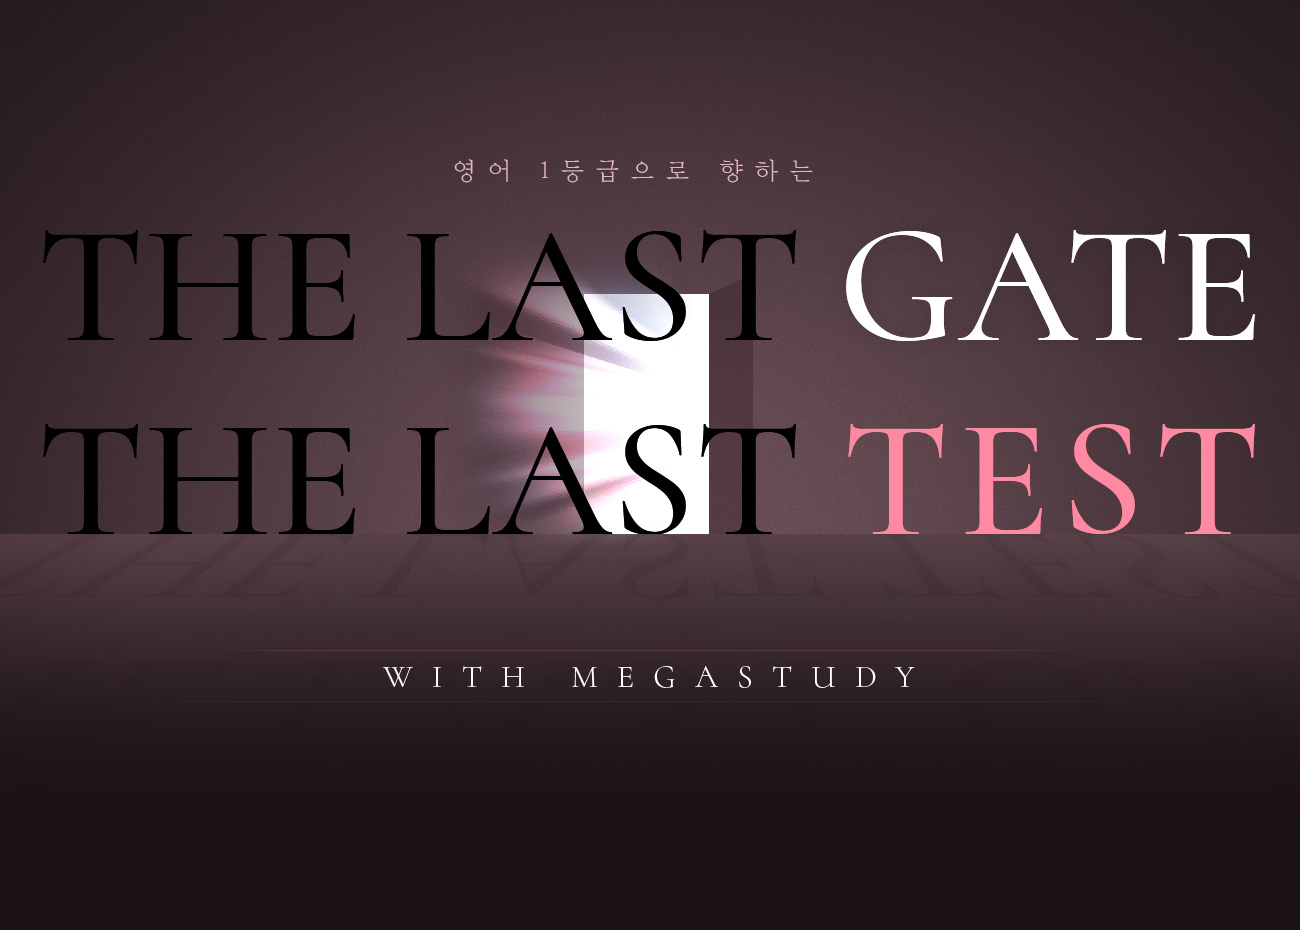 THE LAST GATE THE LAST TEST